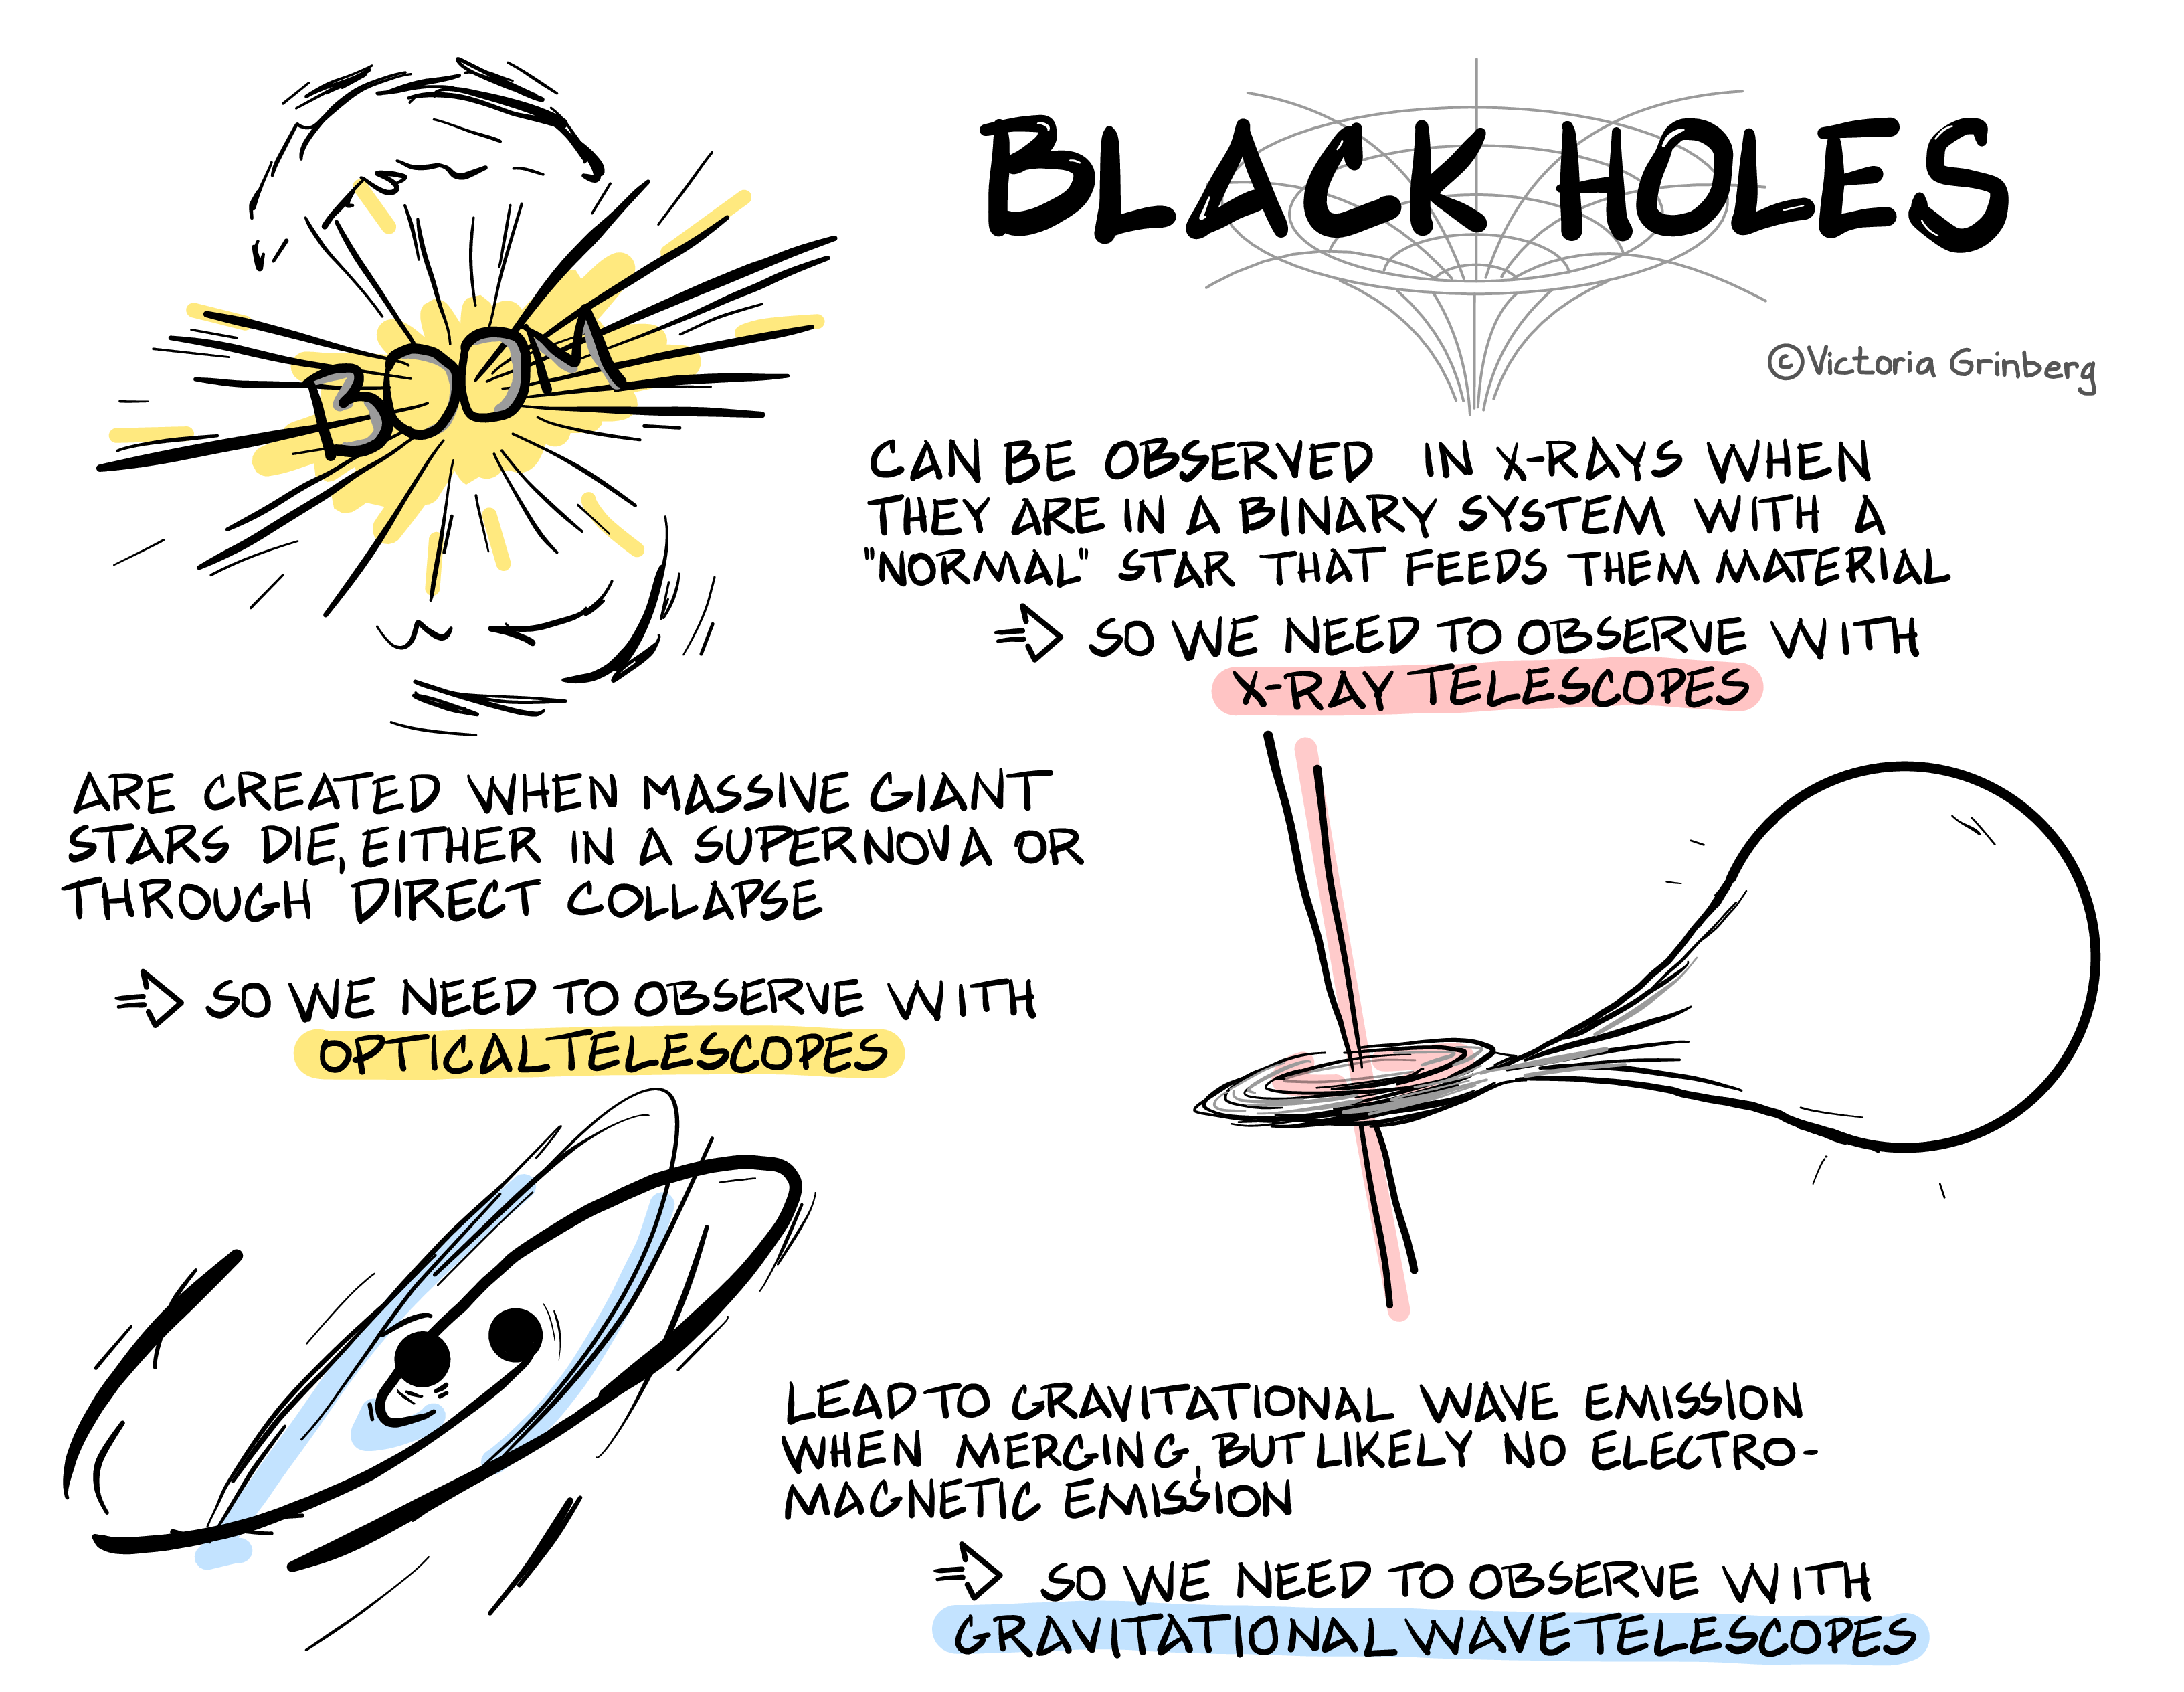 Title: 'Stellar Black Holes'. Followed by three mainly black and white drawings and text.1. Drawing of a supernova explosion. Text: 'Are created when massive giant stars die, either in a supernova or through direct collapse. Arrow. So we need to observe with optical telescopes.' 2. Drawing of an X-ray binary, with accretion disk and jet. Text: 'Can be observed in X-rays when they are in a binary system with a 'normal' star that feeds them material. Arrow. So we need to observed with X-ray telescopes'.3. Drawing of a merging black hole pair emitting waves. Text: 'Lead to gravitational wave emission when merging, but likely no electomagnetic emission. Arrow. So we need to observe with gravitational wave telescopes.'.